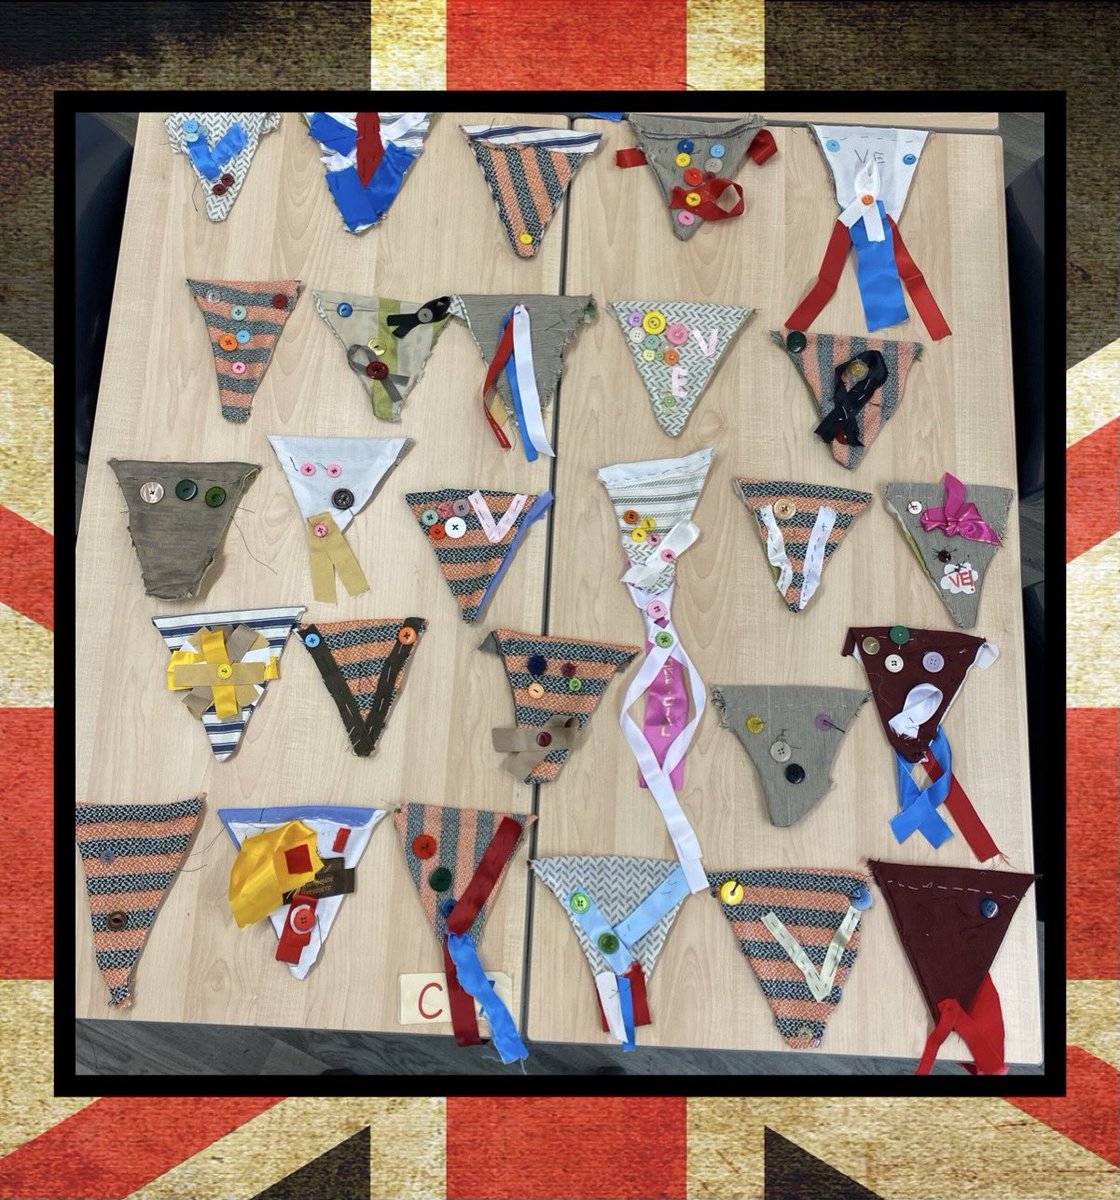 Take a look at the fantastic creations from #sjsbclass10 as part of STEM week. The children have researched,  planned, measured, designed, stitched and evaluated their own VE Day bunting #sjsbart #sjsbdt #sjsbstem @StJosephStBede